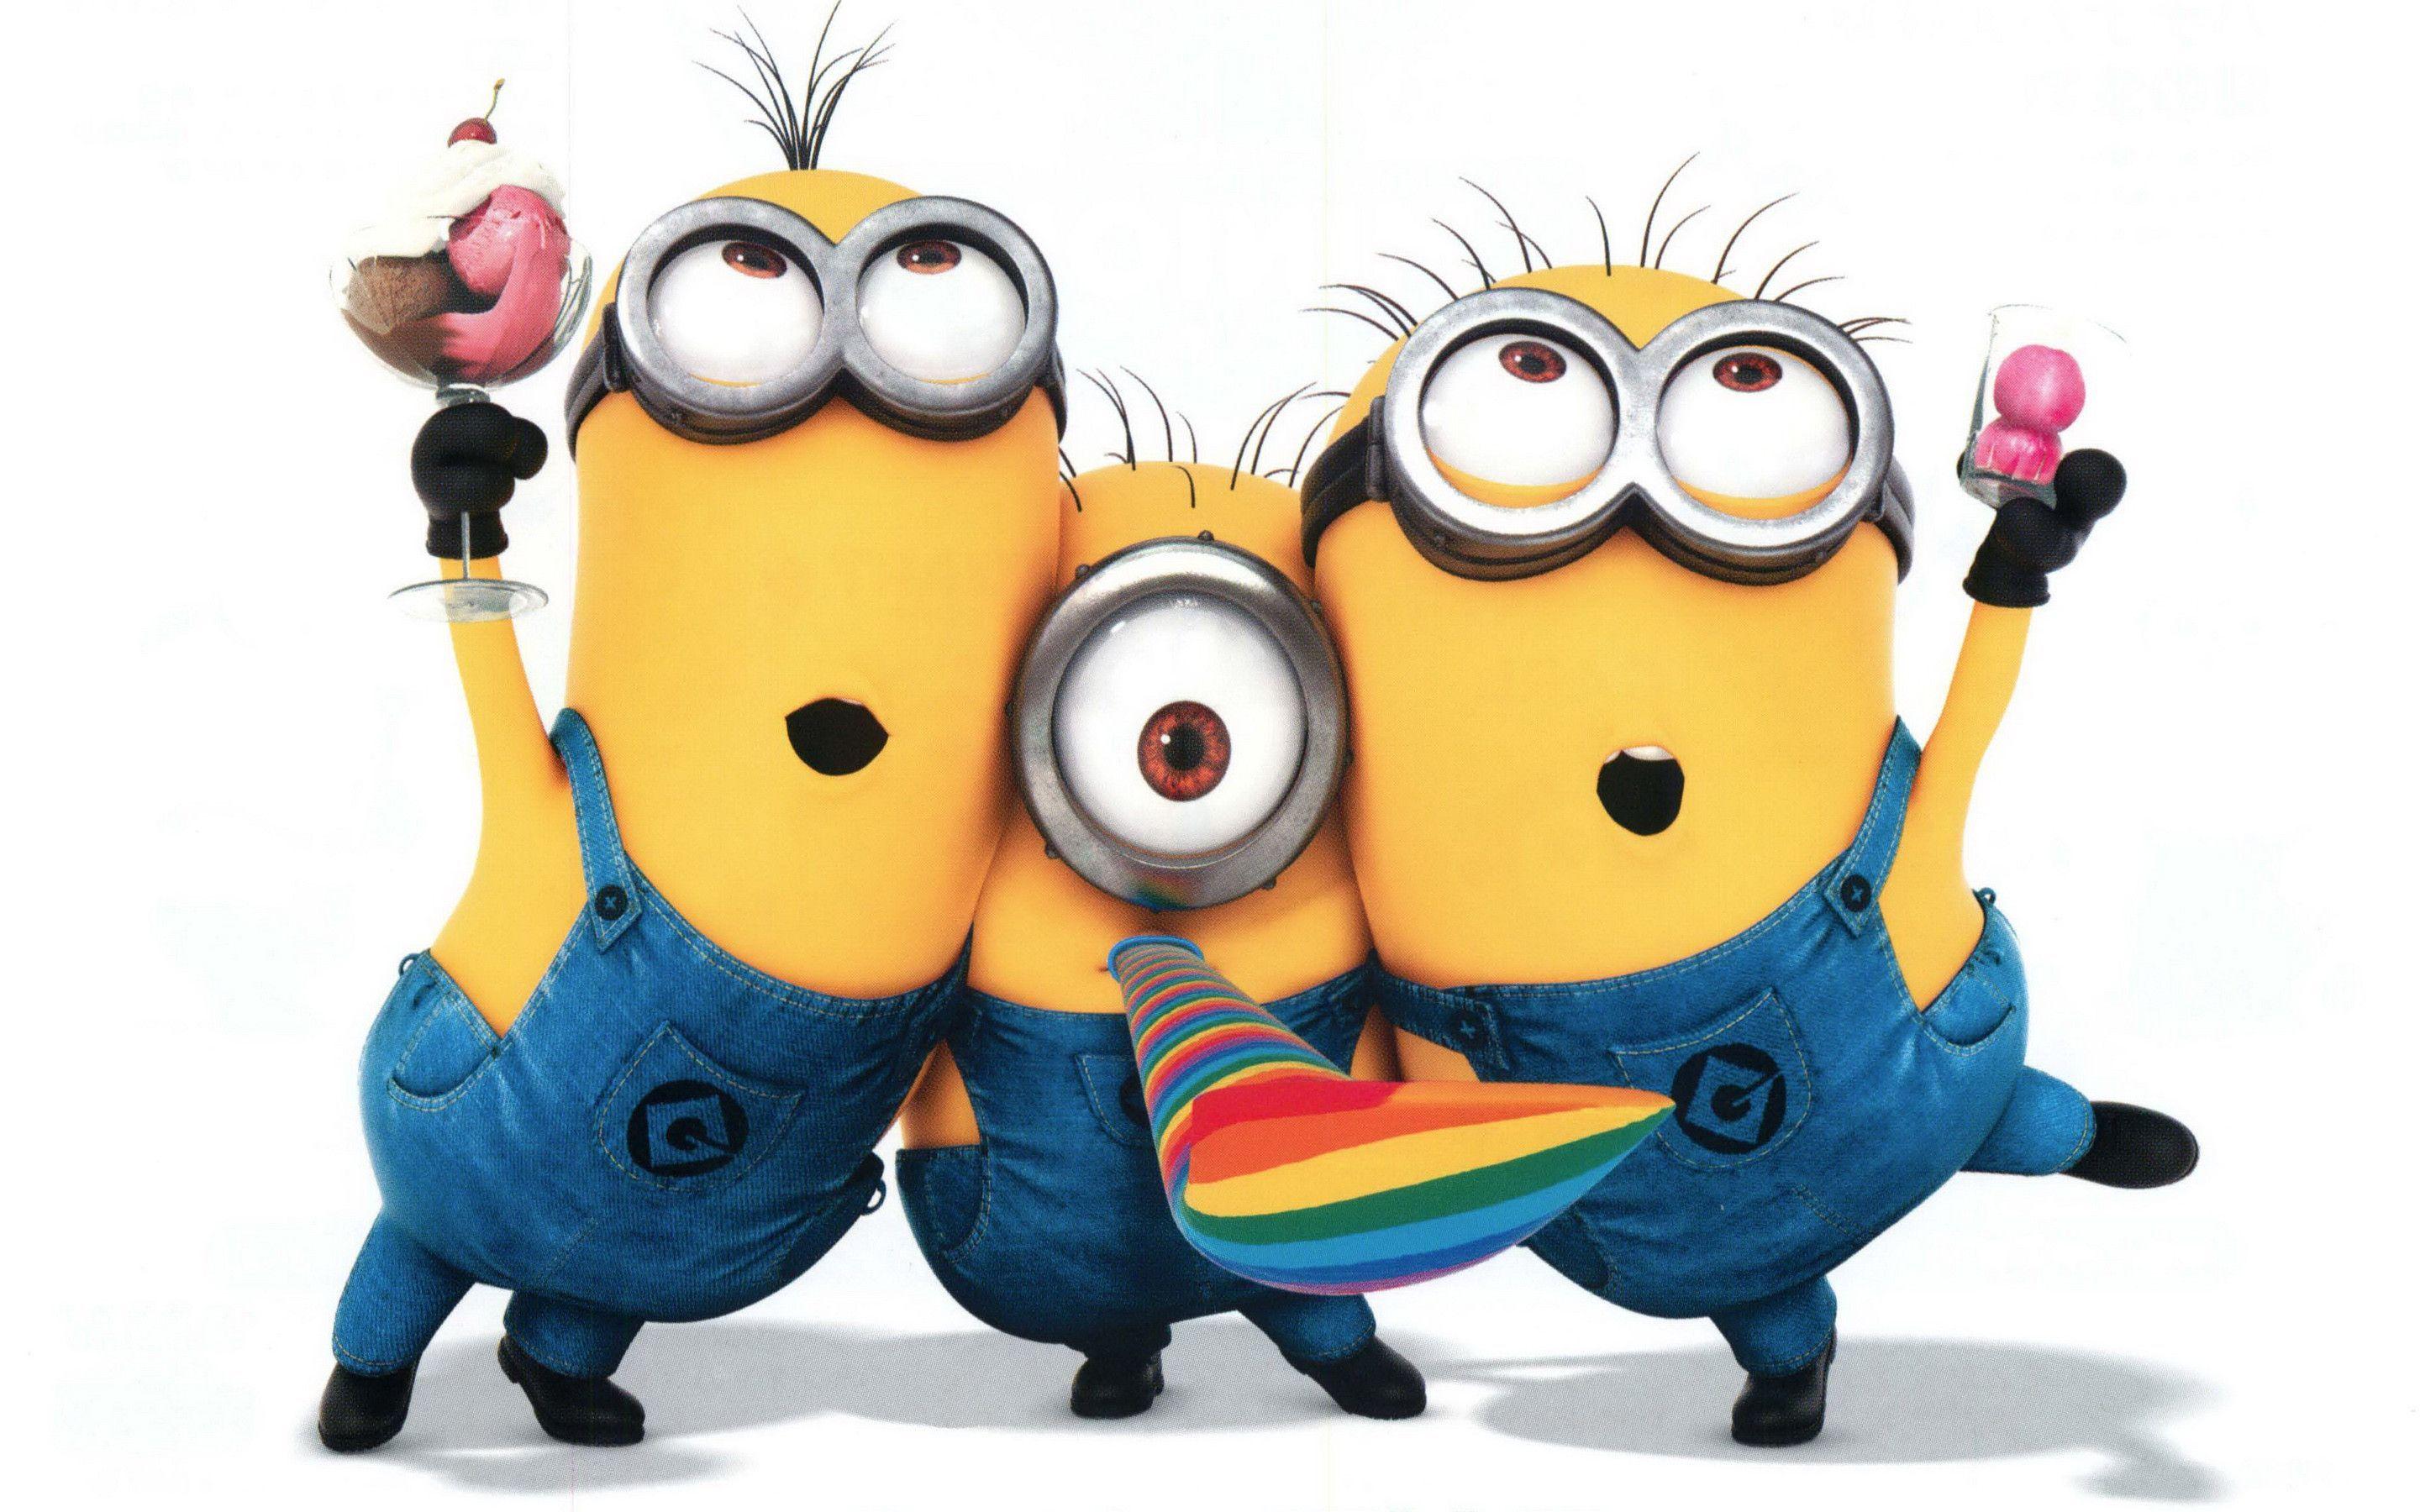 Cute despicable me minions wallpapers